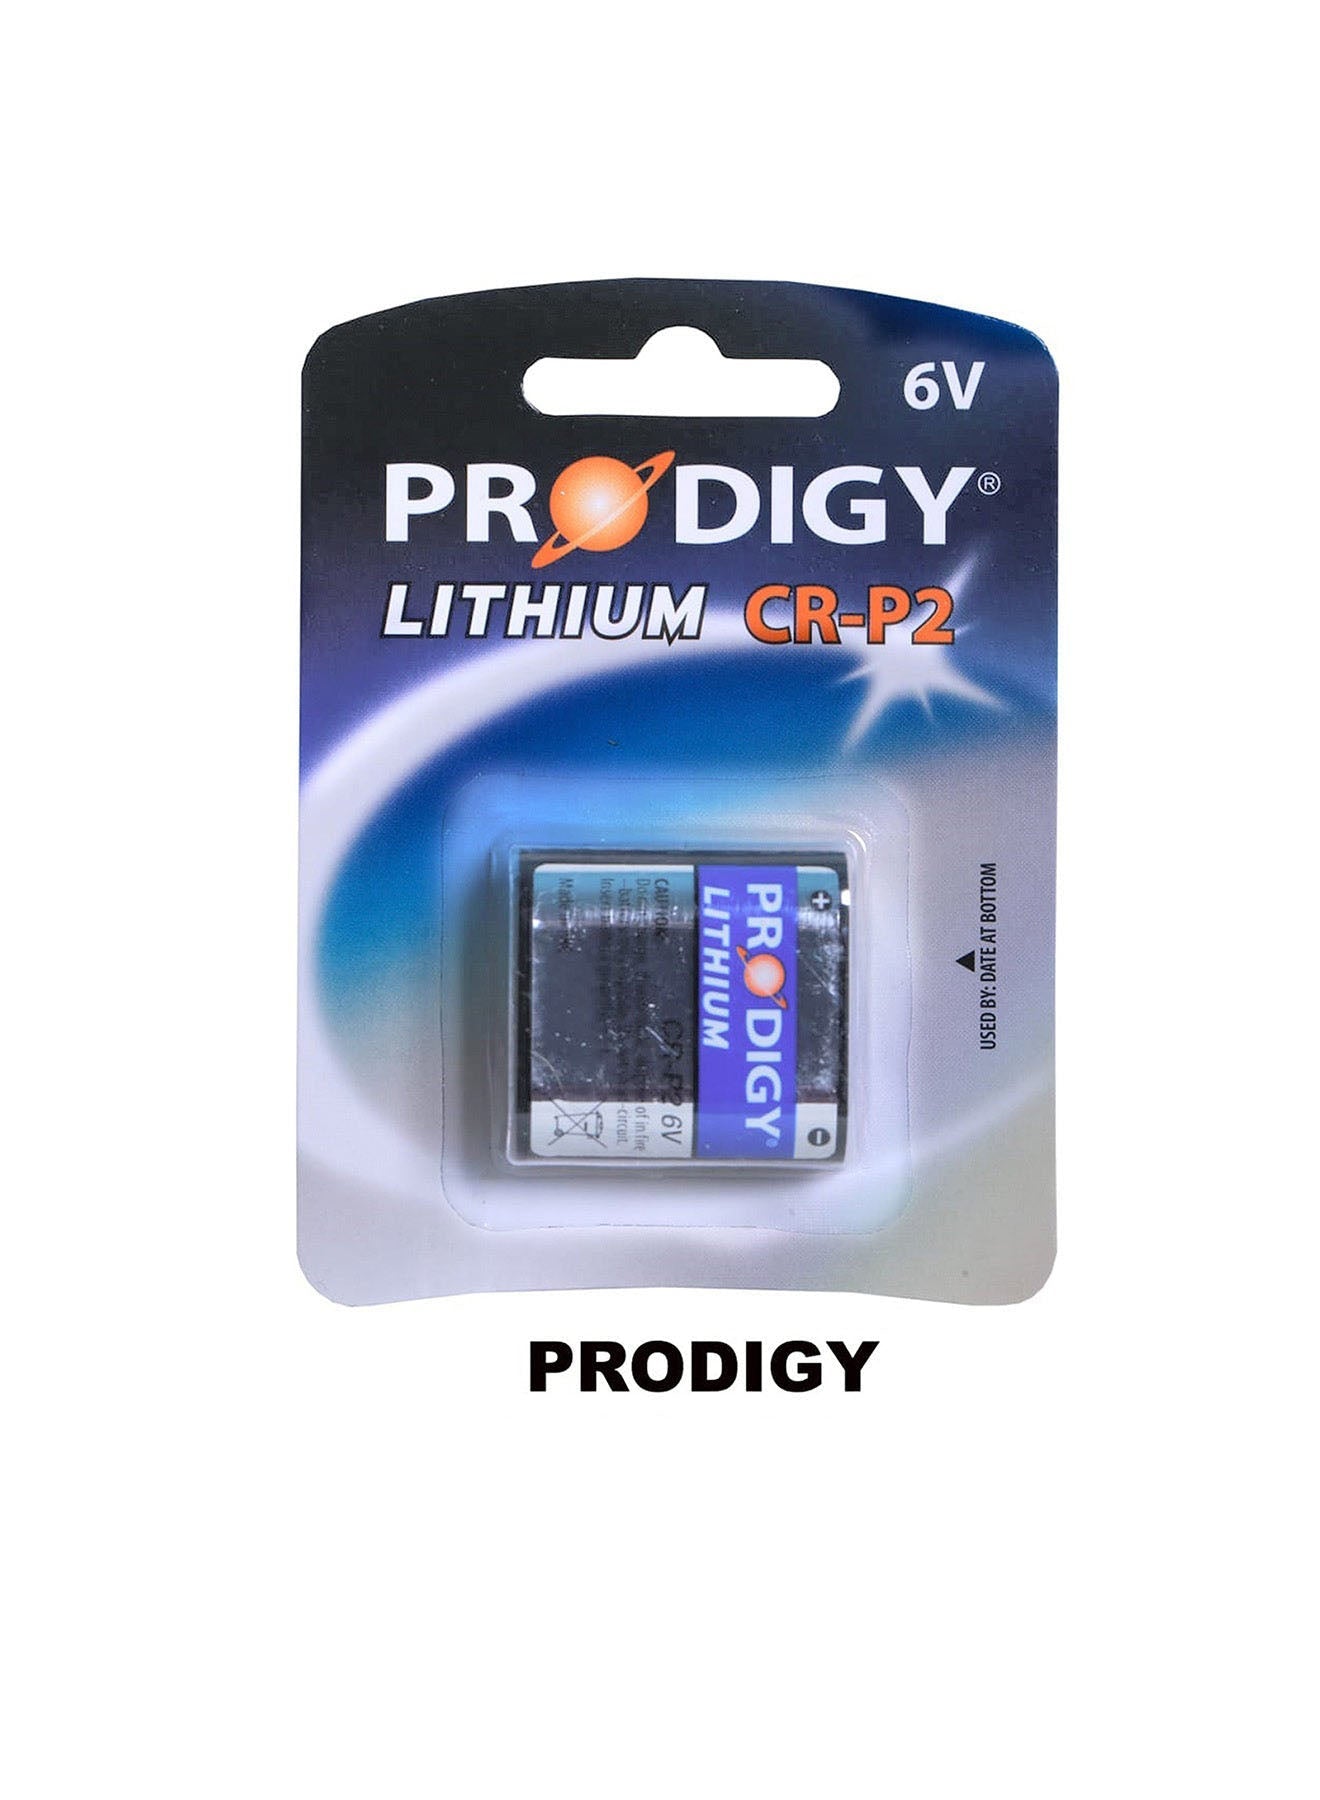 Prodigy Lithium CRP2 6V Value Pack of 3 